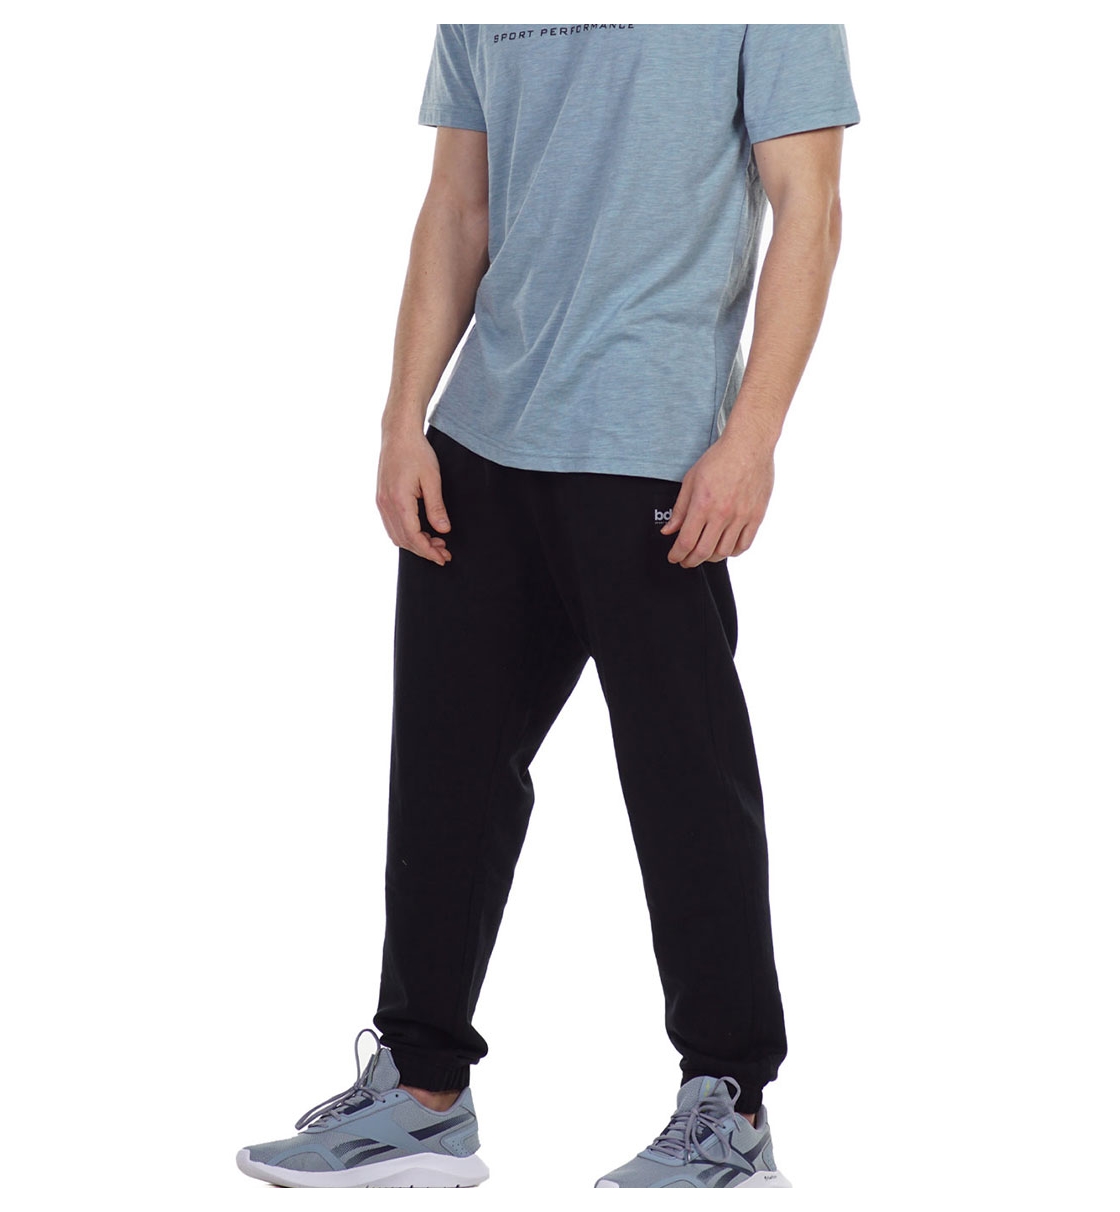 Body Action Ss21 Men'S Training Sport Joggers